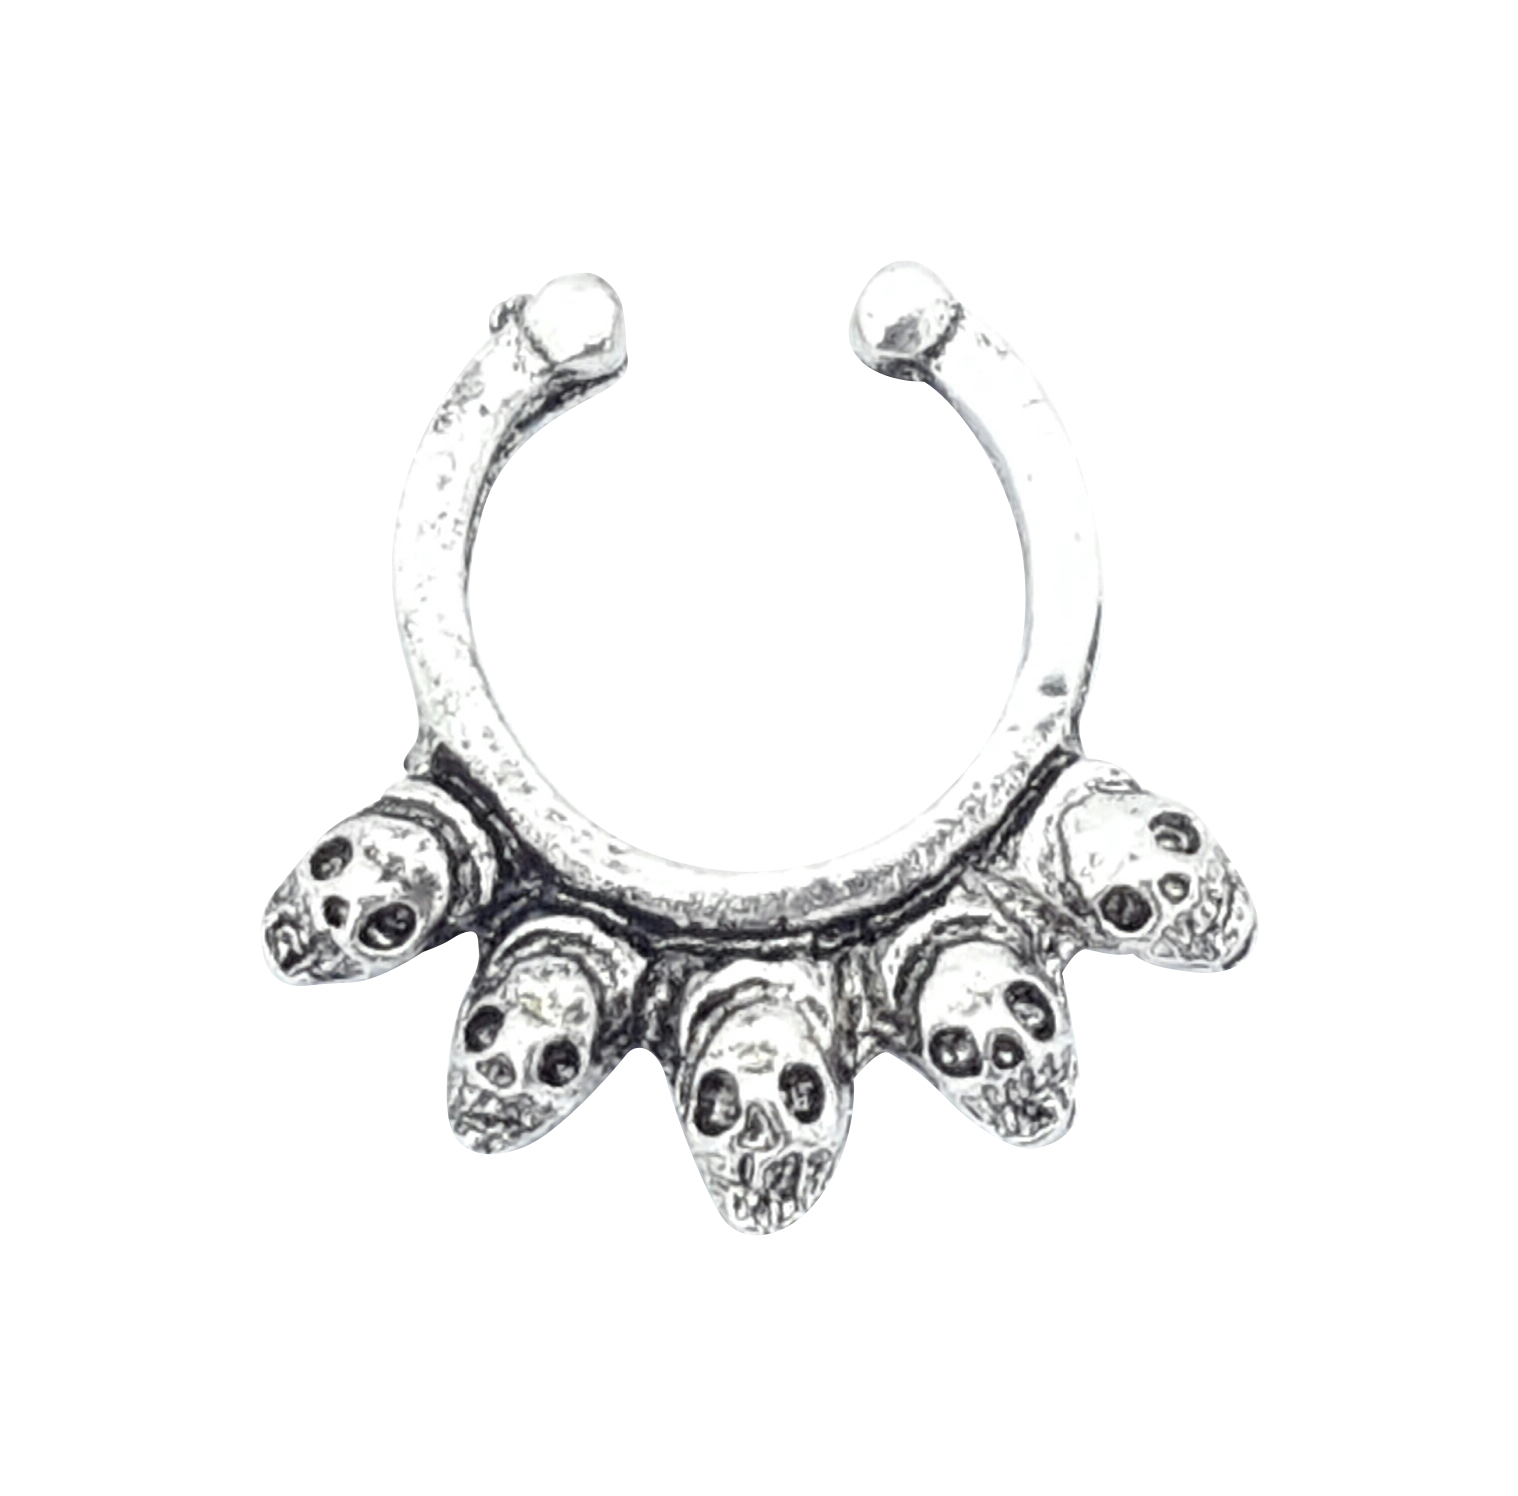 Skull Faux Nose/Septum Hanger - Skull Silver septum Post-apocalyptic Nu-goth nose Metal Industrial Gothic Goth Futuristic faux fake clicker Accessory